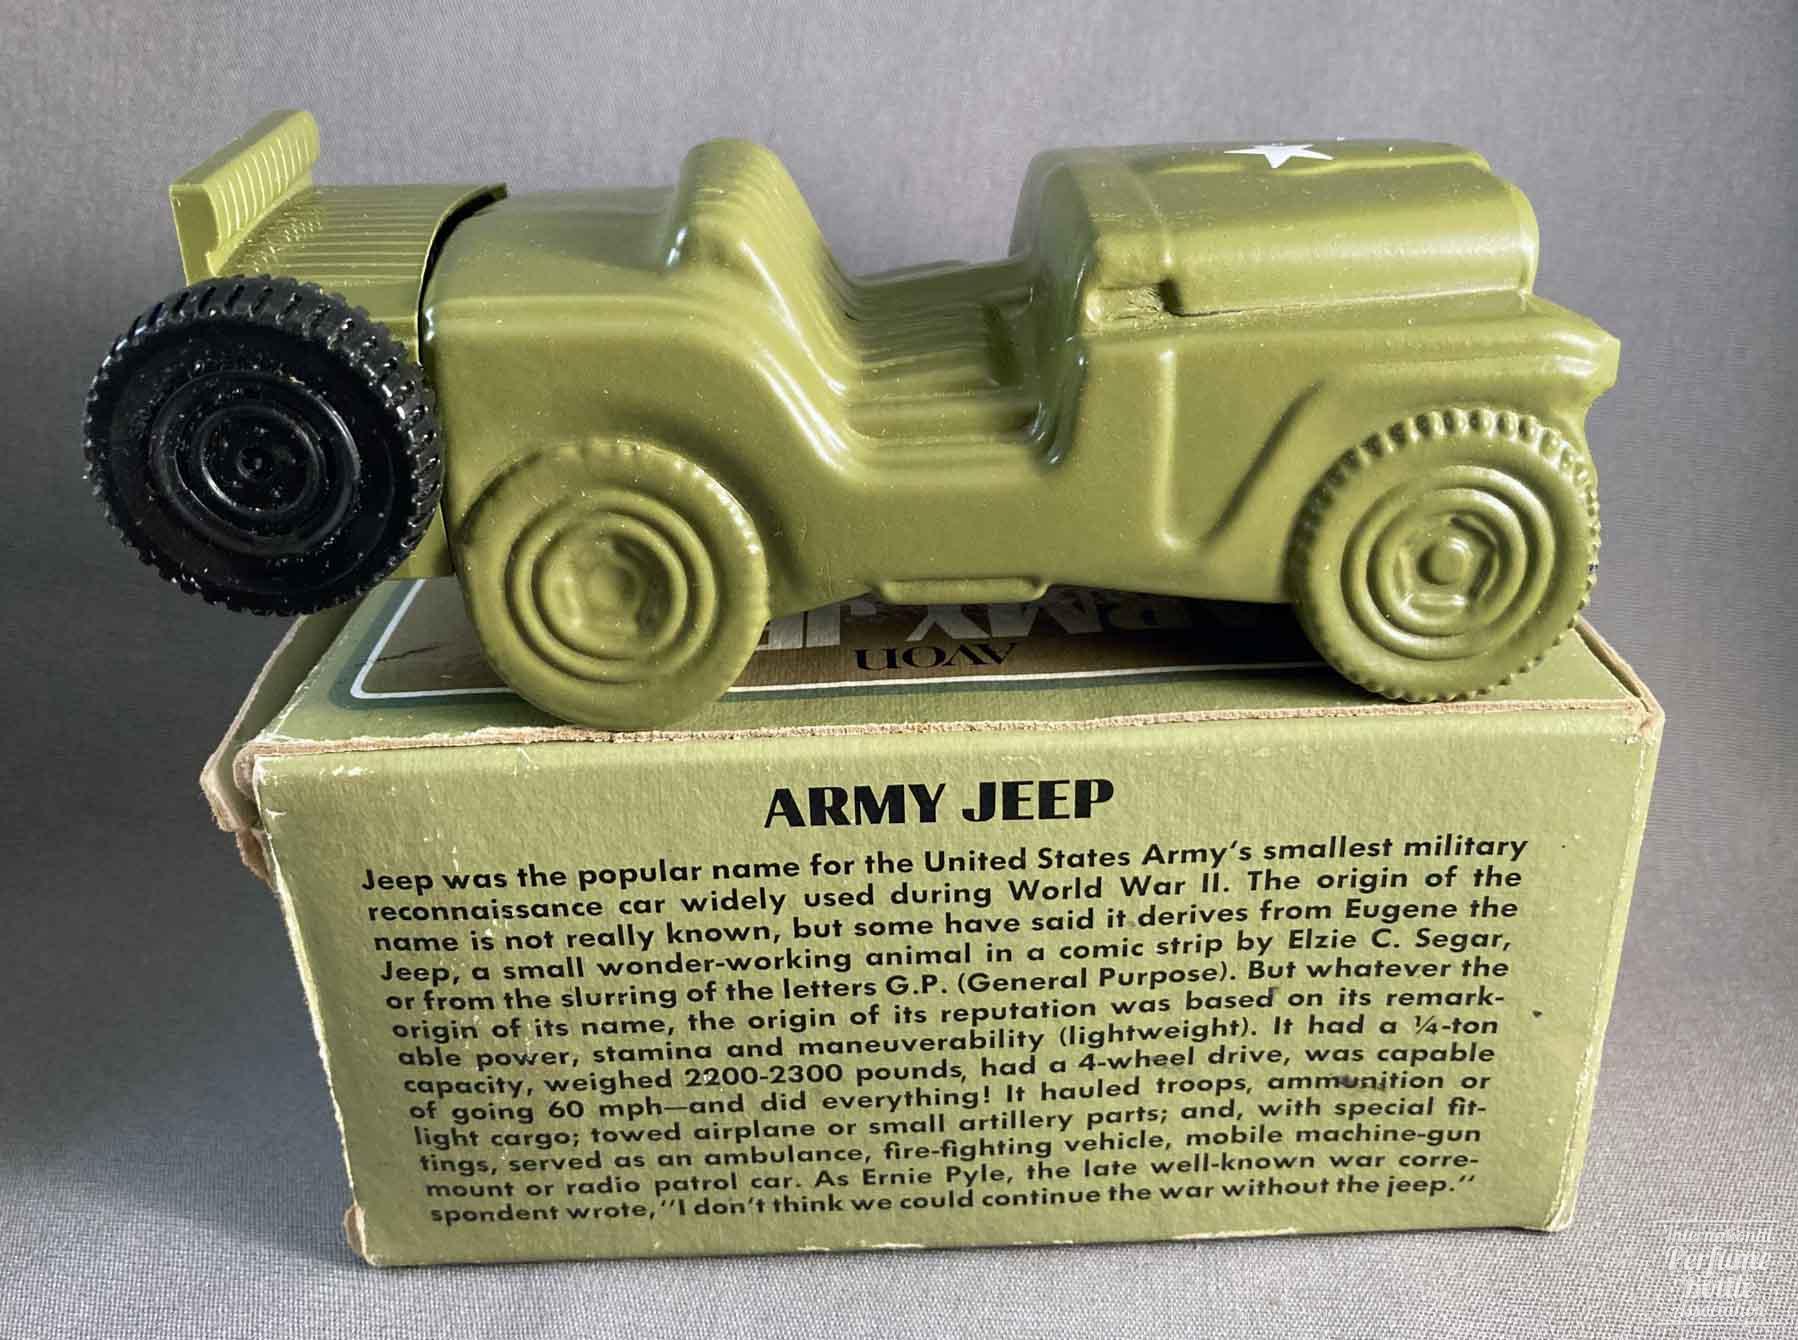 "Army Jeep" Decanter by Avon